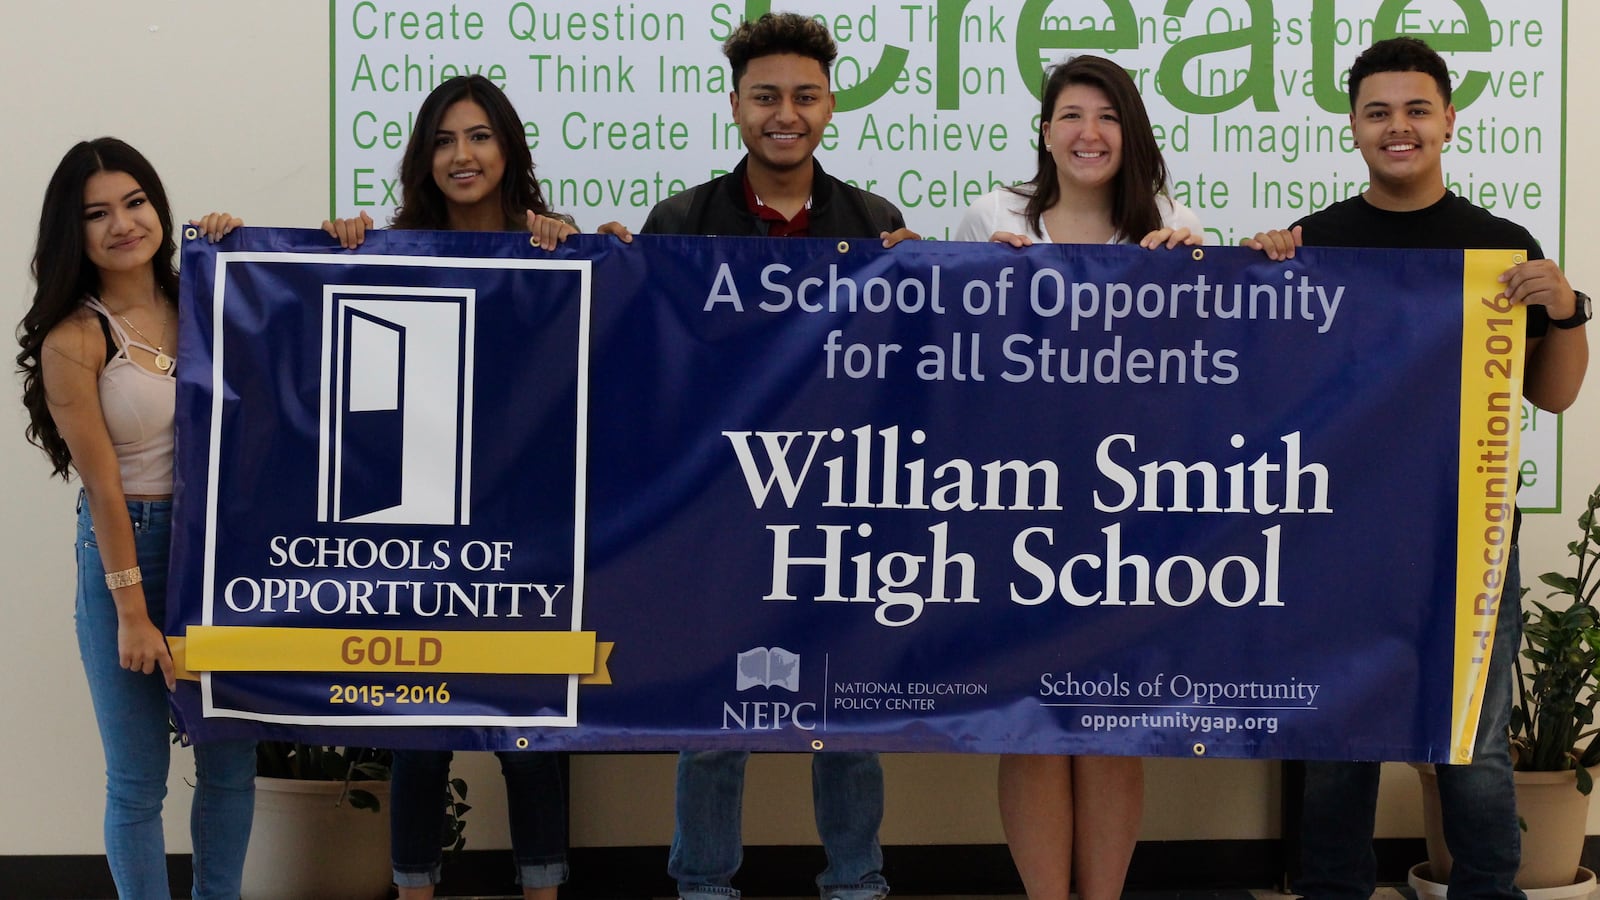 Students from William Smith High School.